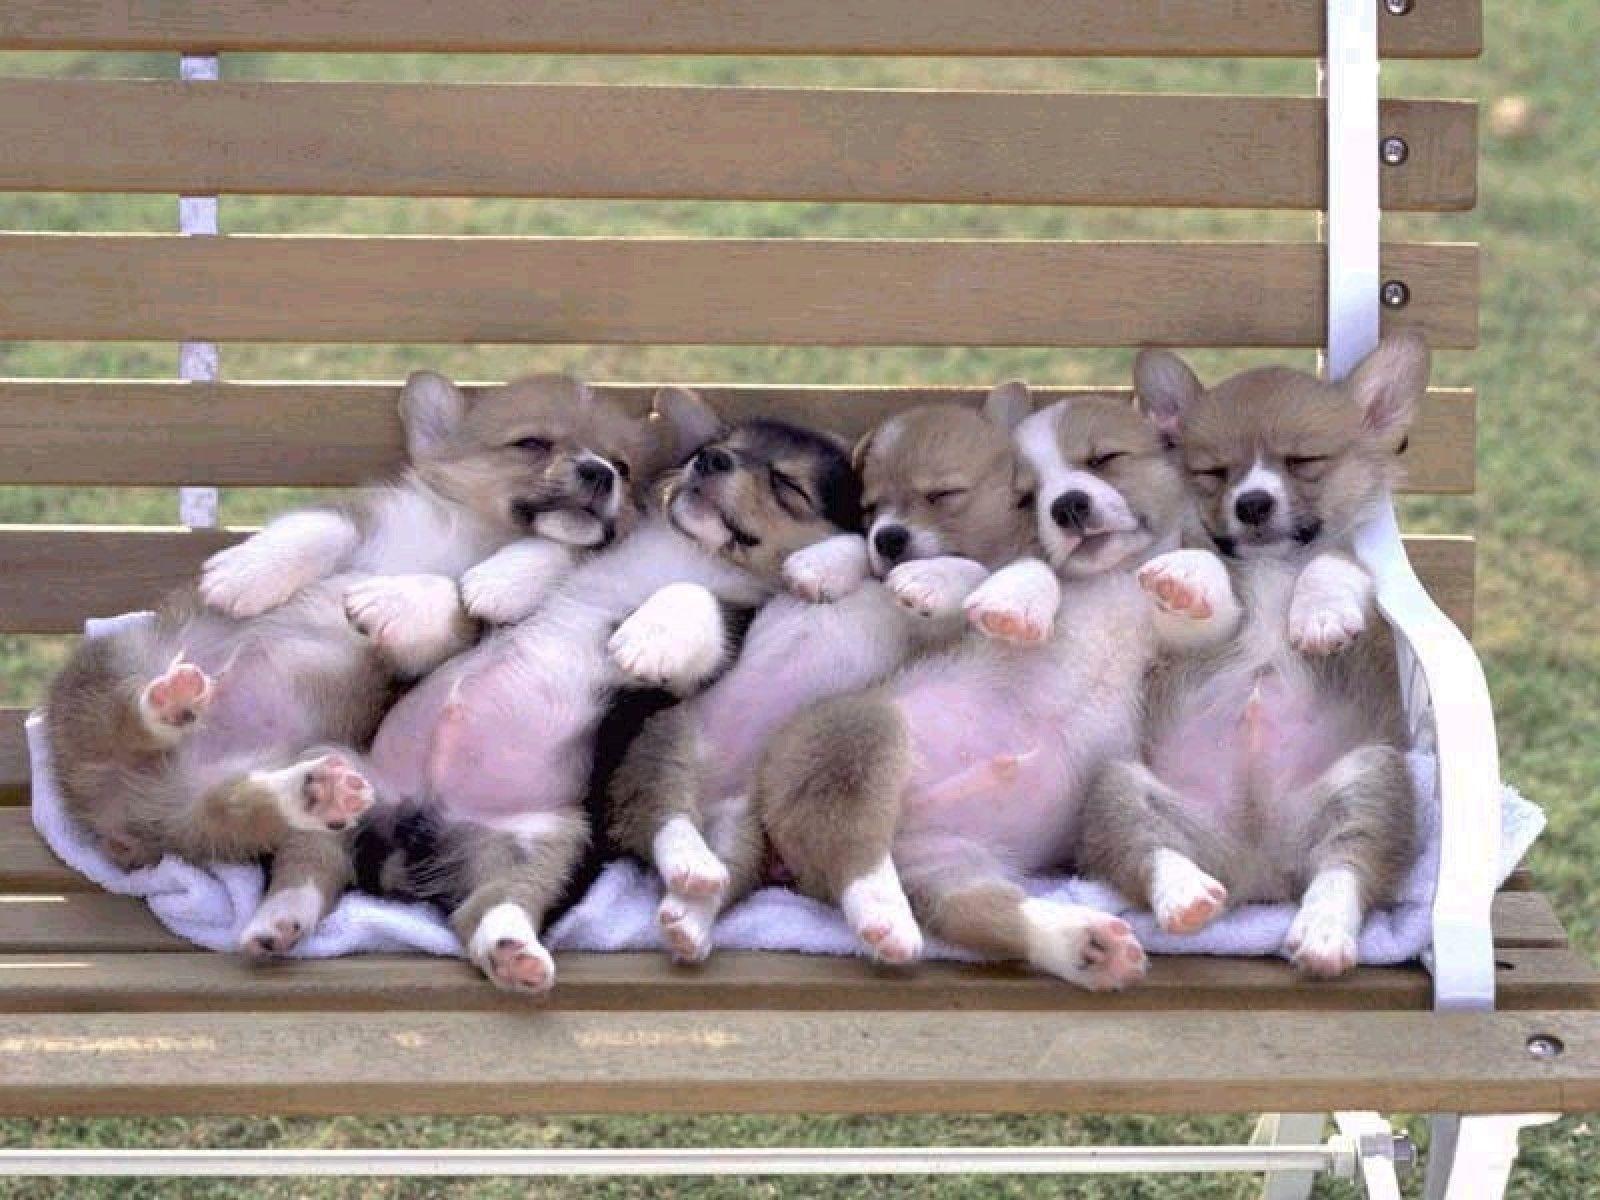 Puppies velsh Corgi sleeping on a bench wallpaper and image